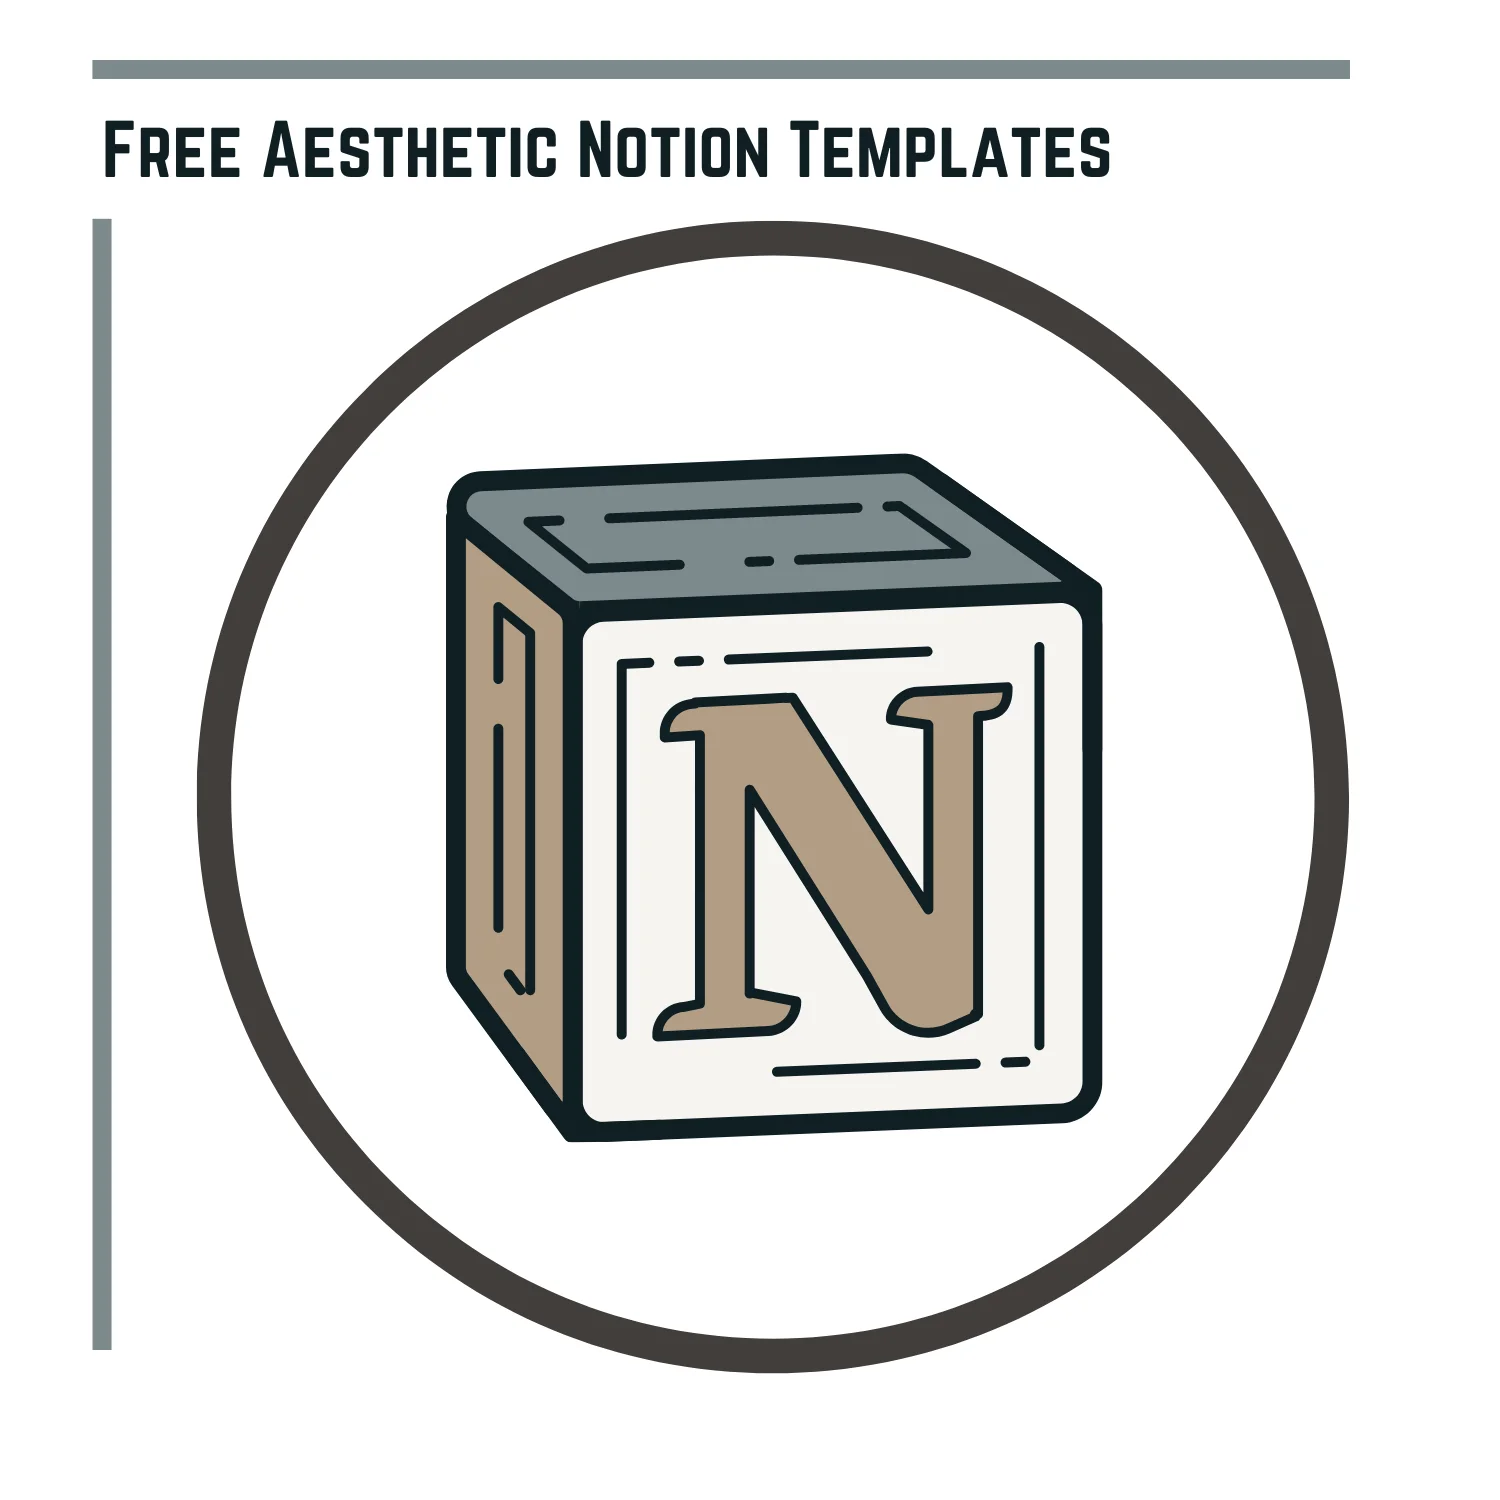 16 Best and Free Aesthetic Notion Templates